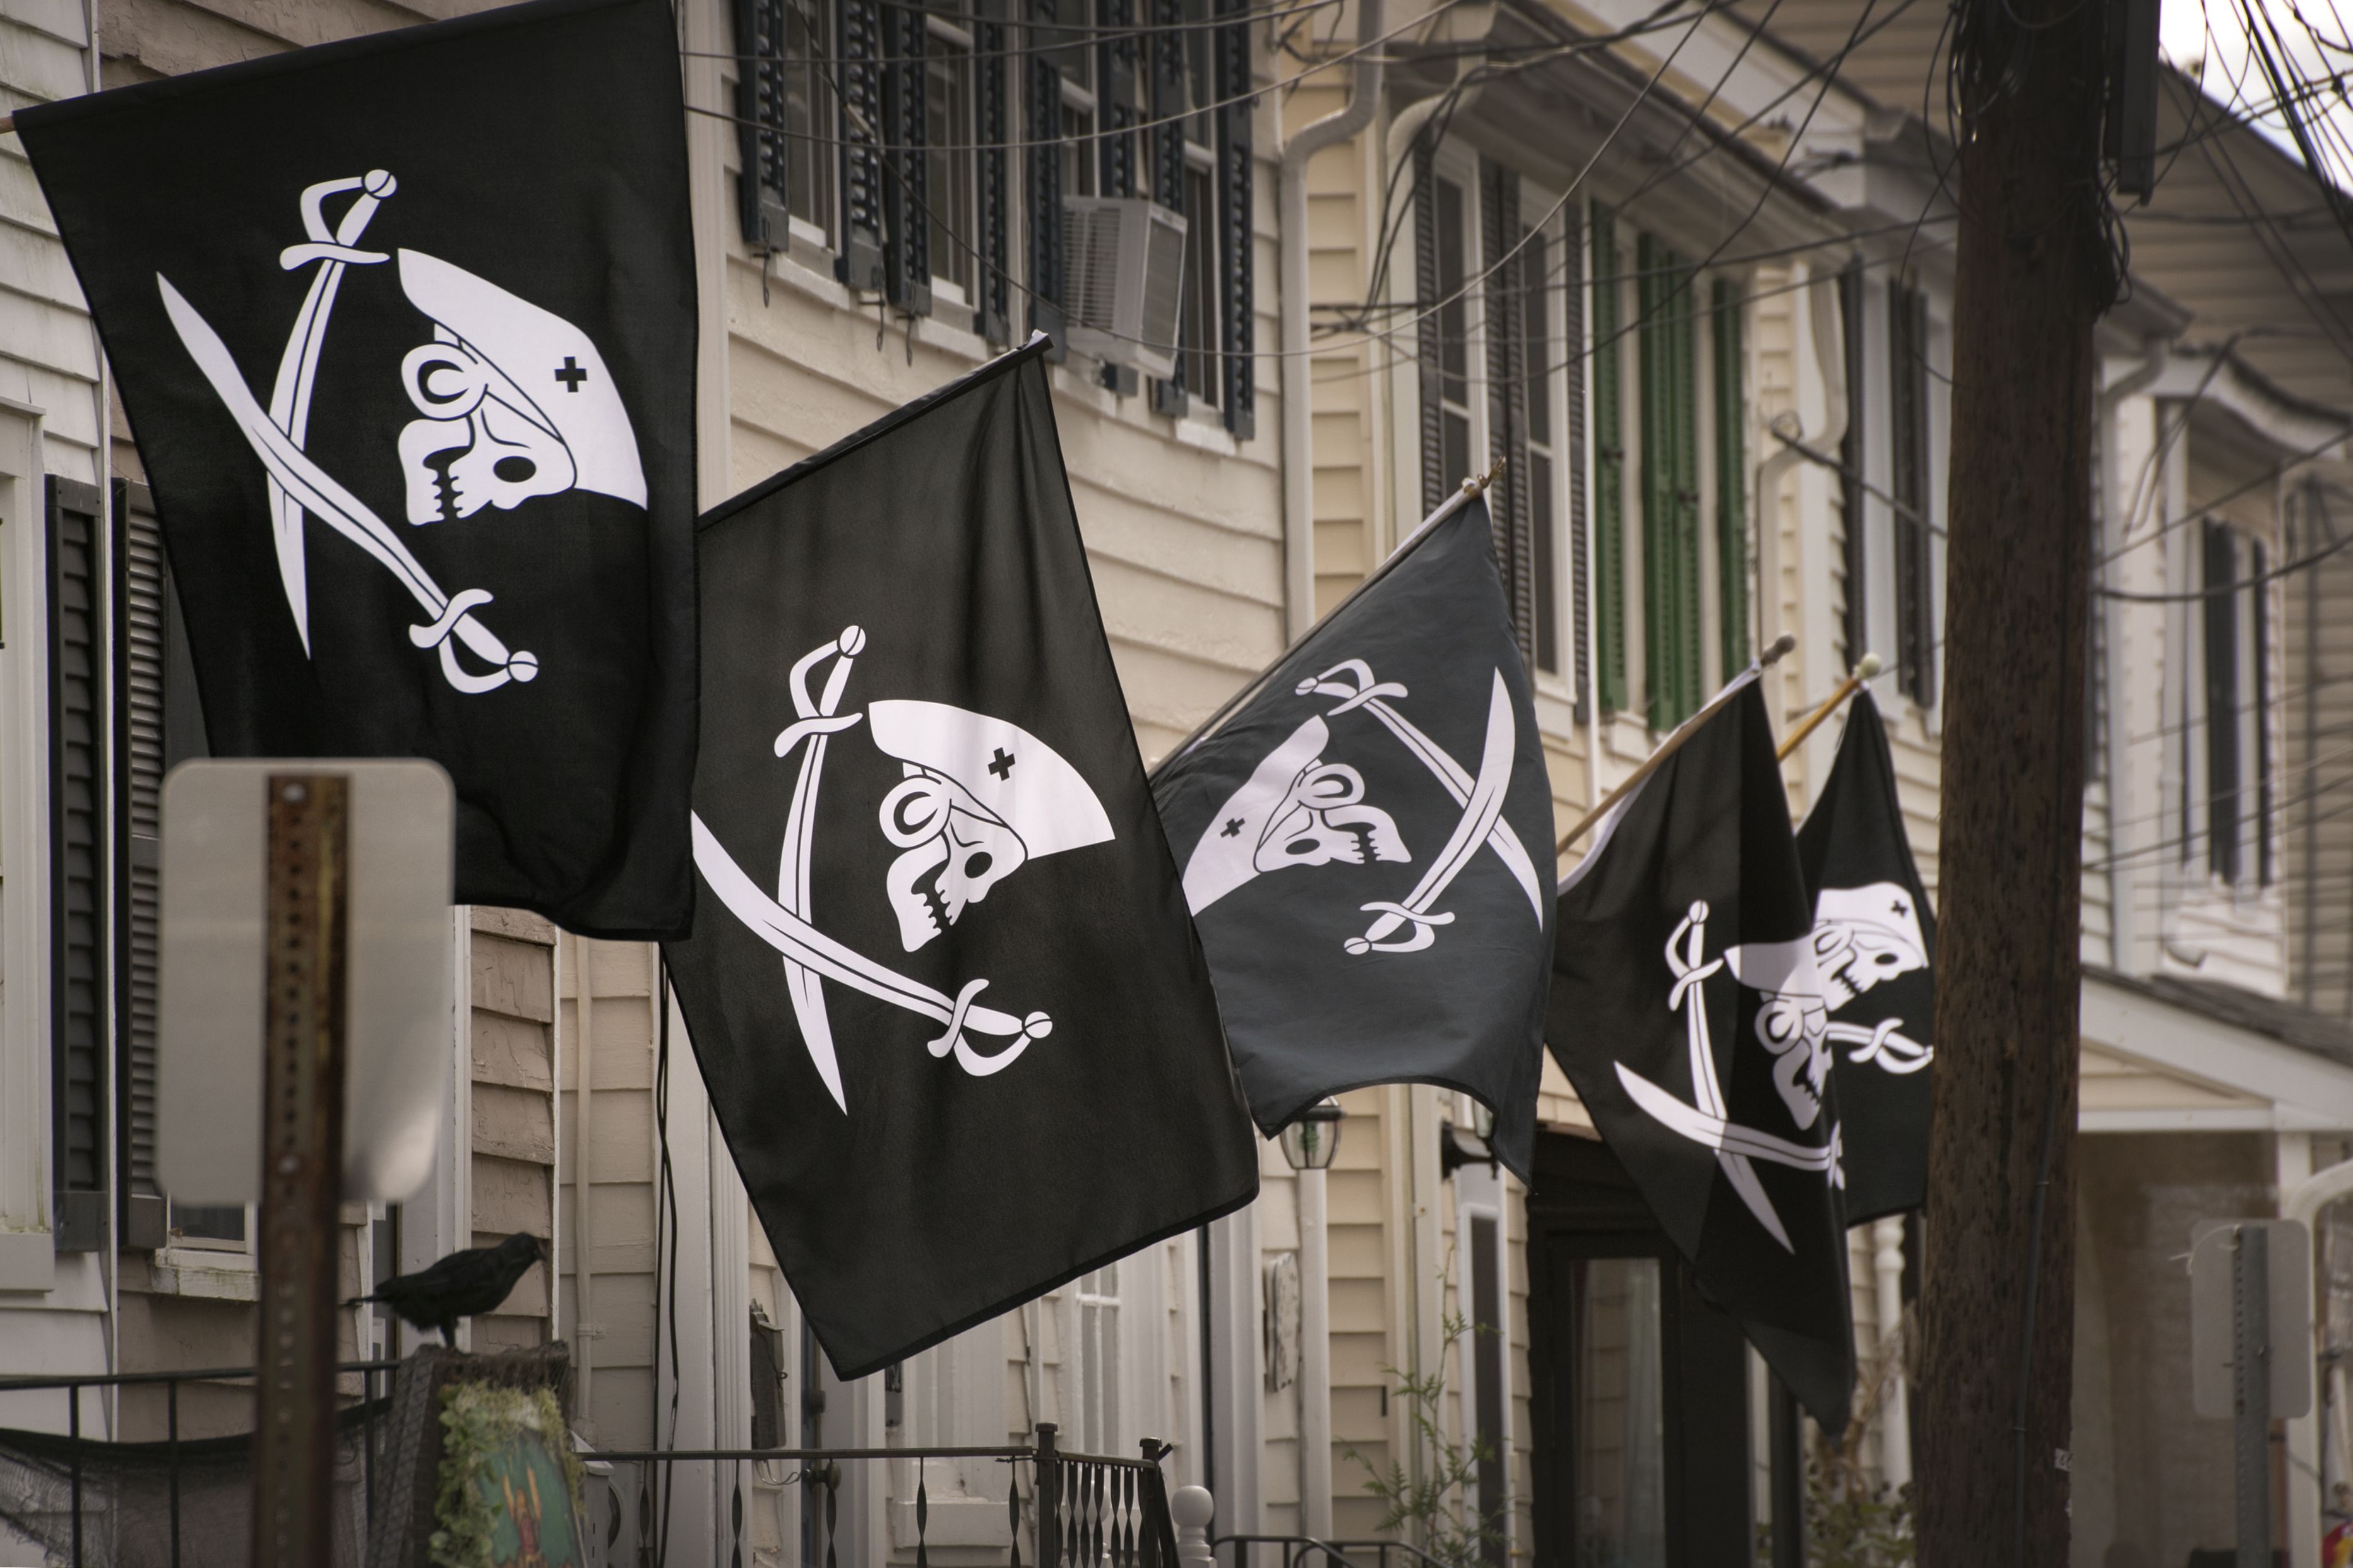 Pirates of New Jersey: Plunder and High Adventure on the Garden State  Coastline